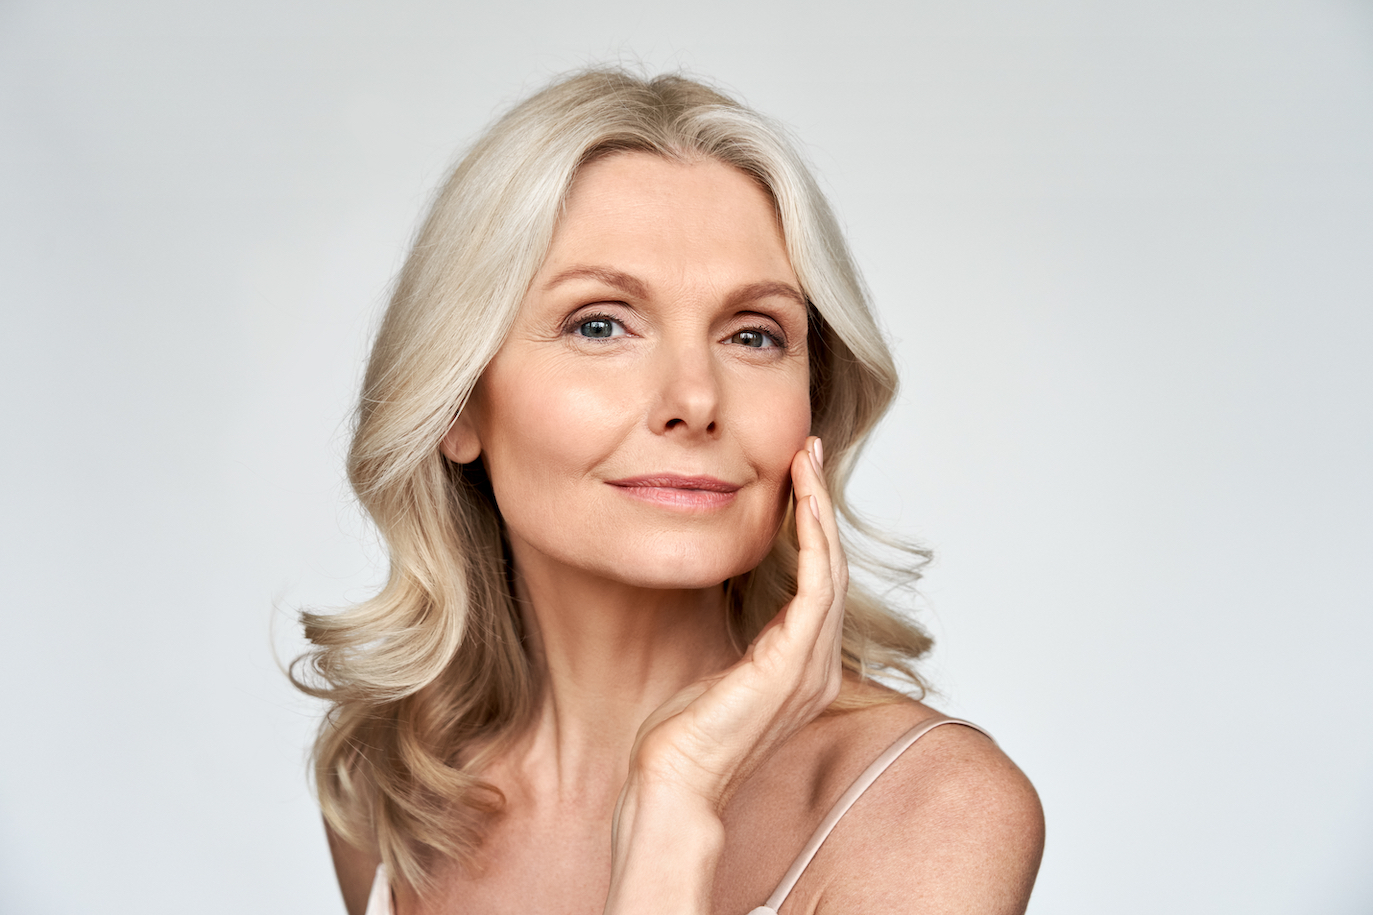 Woman in mid-50's with healthy skin looking at camera on white background. Her left hand is by her face to accentuate her skin's appearance